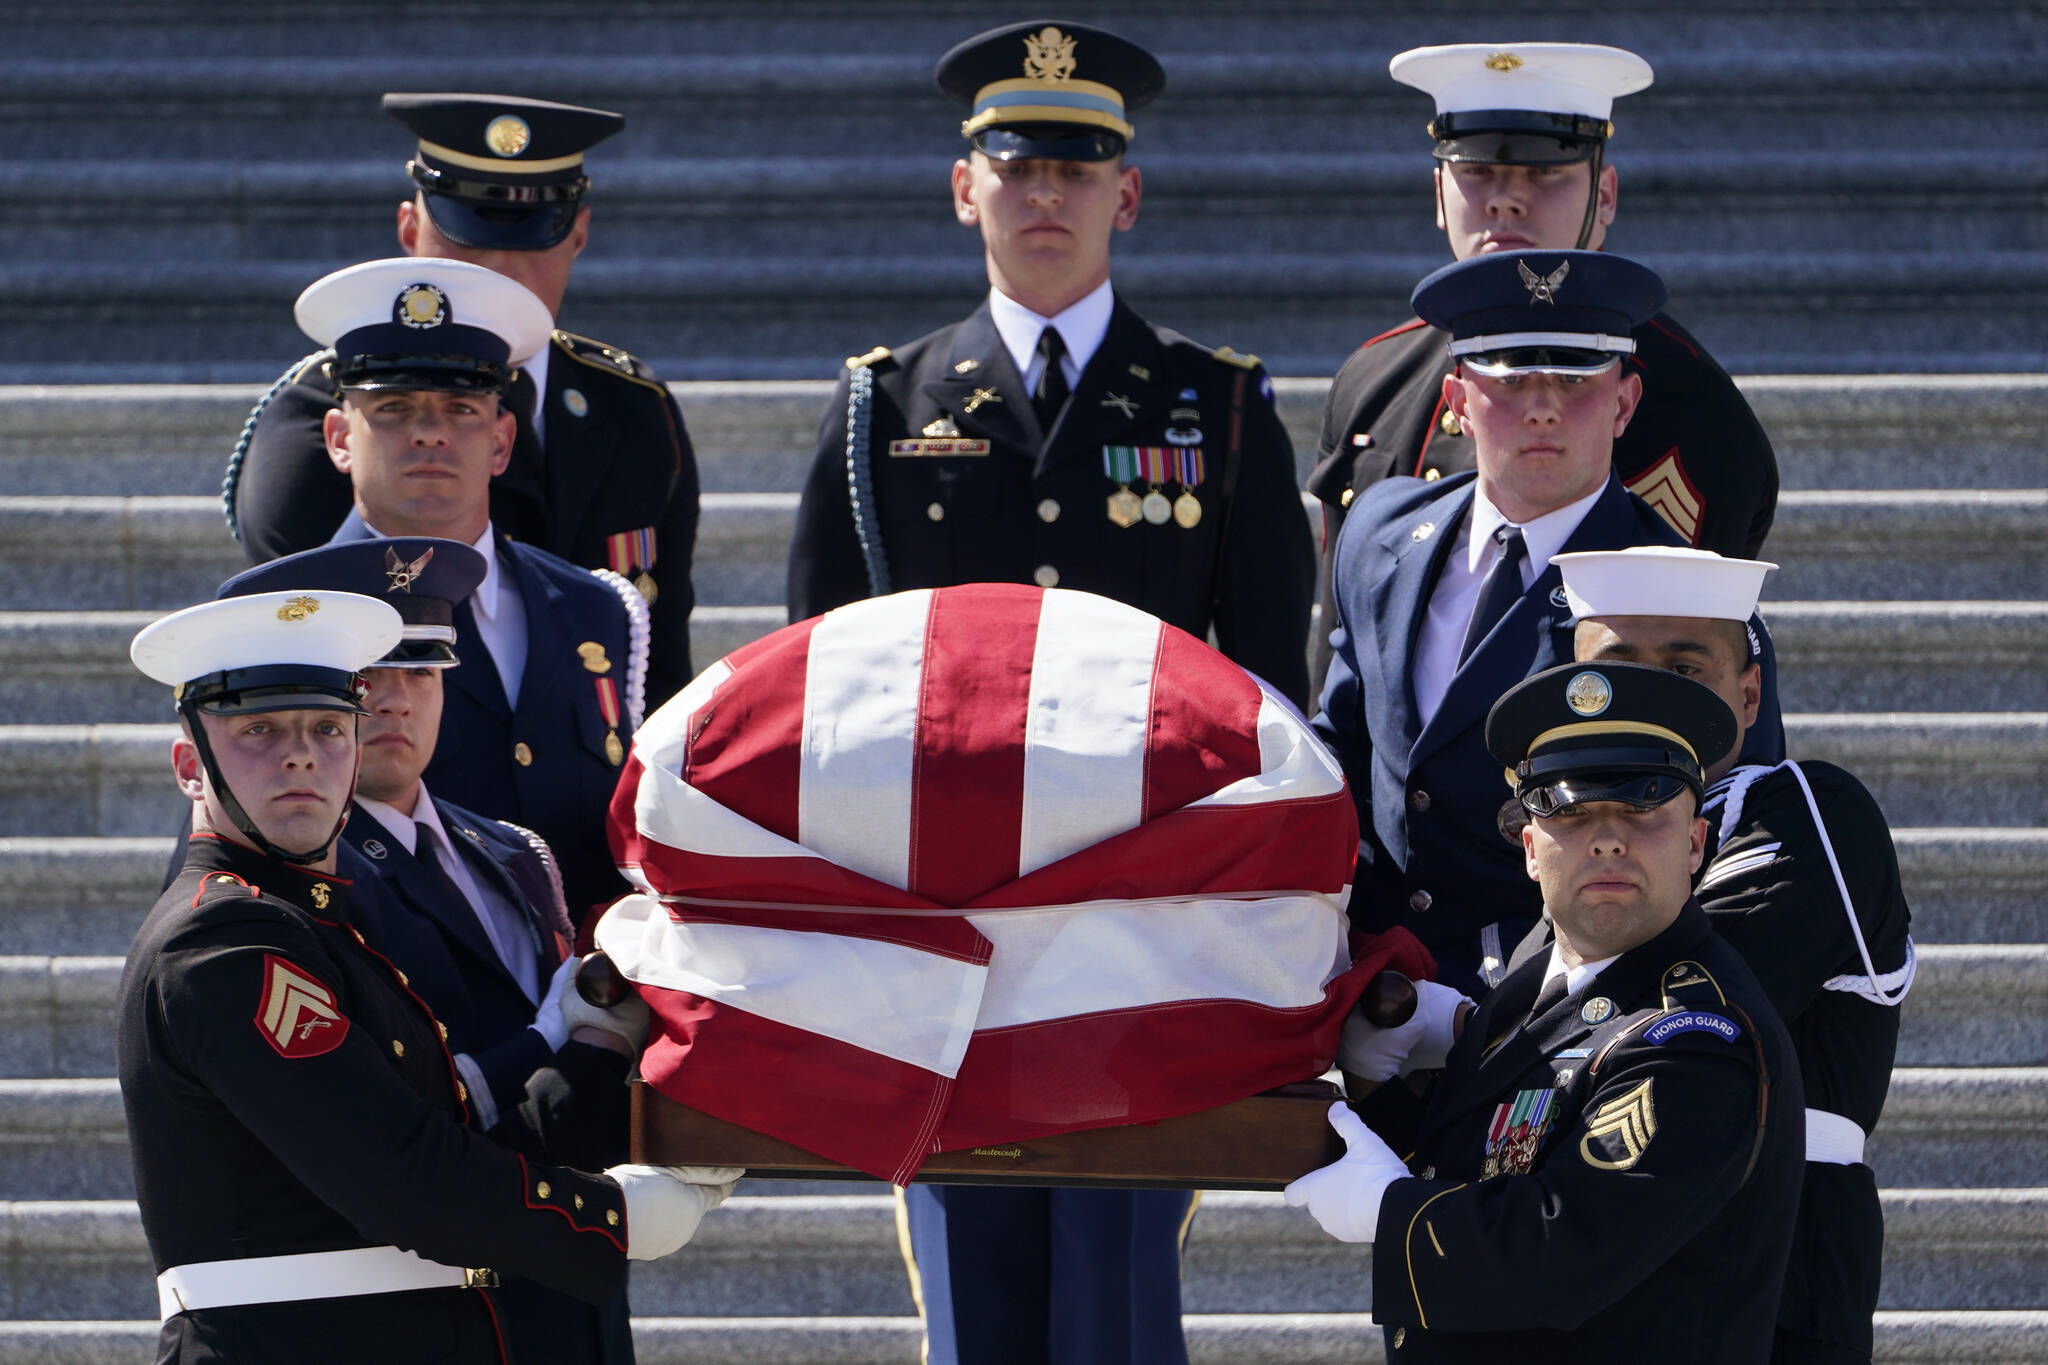 A joint forces honor guard carries the casket of Rep. Don Young, R-Alaska, down the steps of the House of Representatives on Capitol Hill in Washington, Tuesday, March 29, 2022. Young, the longest-serving member of Alaska's congressional delegation, died Friday, March 18, 2022. He was 88. (AP Photo / Susan Walsh)